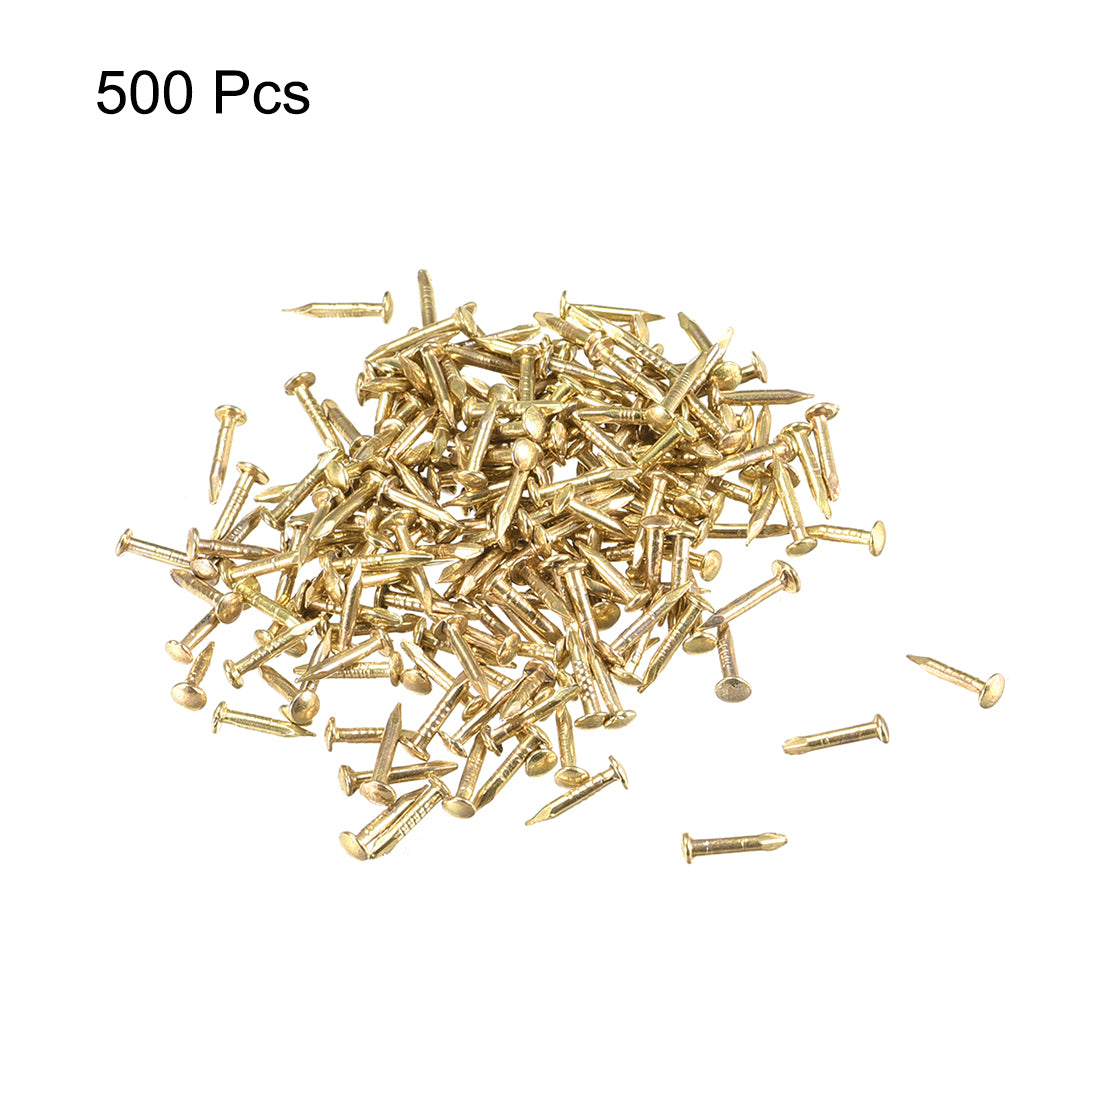 uxcell Uxcell Small Tiny Nails 1X8mm for DIY Decorative Wooden Boxes 500pcs